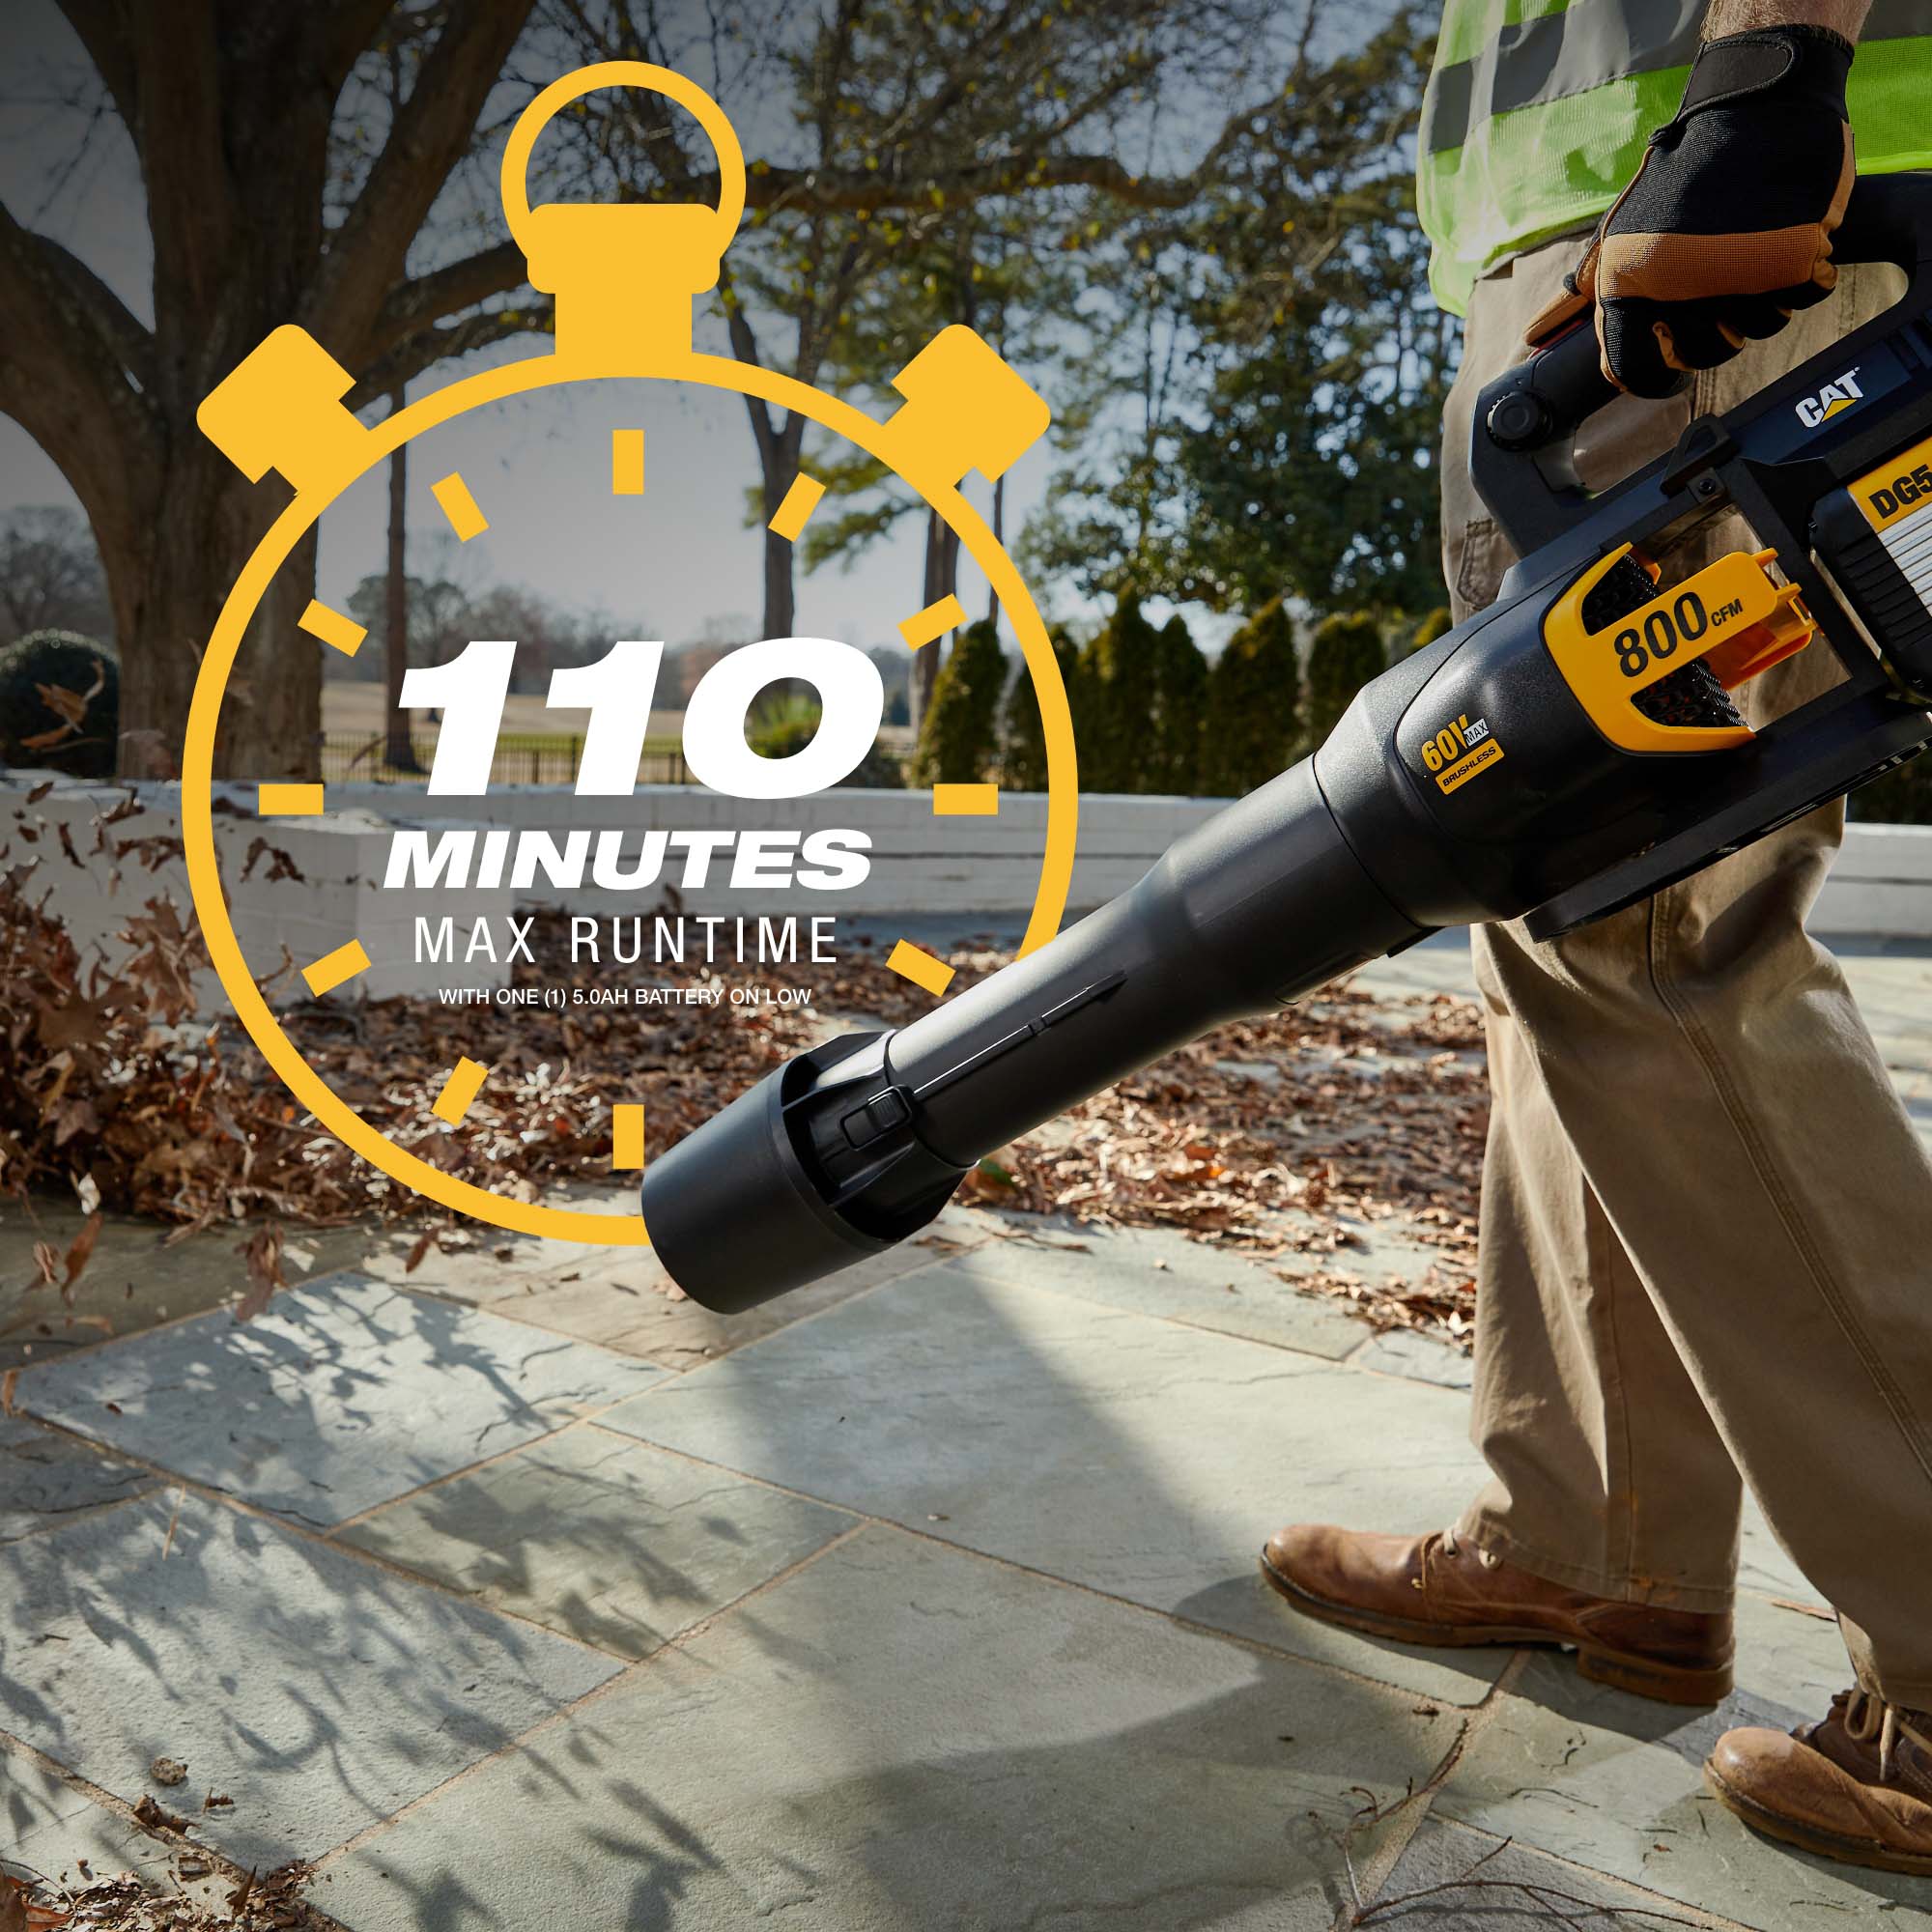 Cordless Leaf Blower Compatible with DEWALT 20V Max Battery, 2-in-1  Electric Leaf Vacuum & Blower, Variable Speed Up to 180MPH, Lightweight  Mini